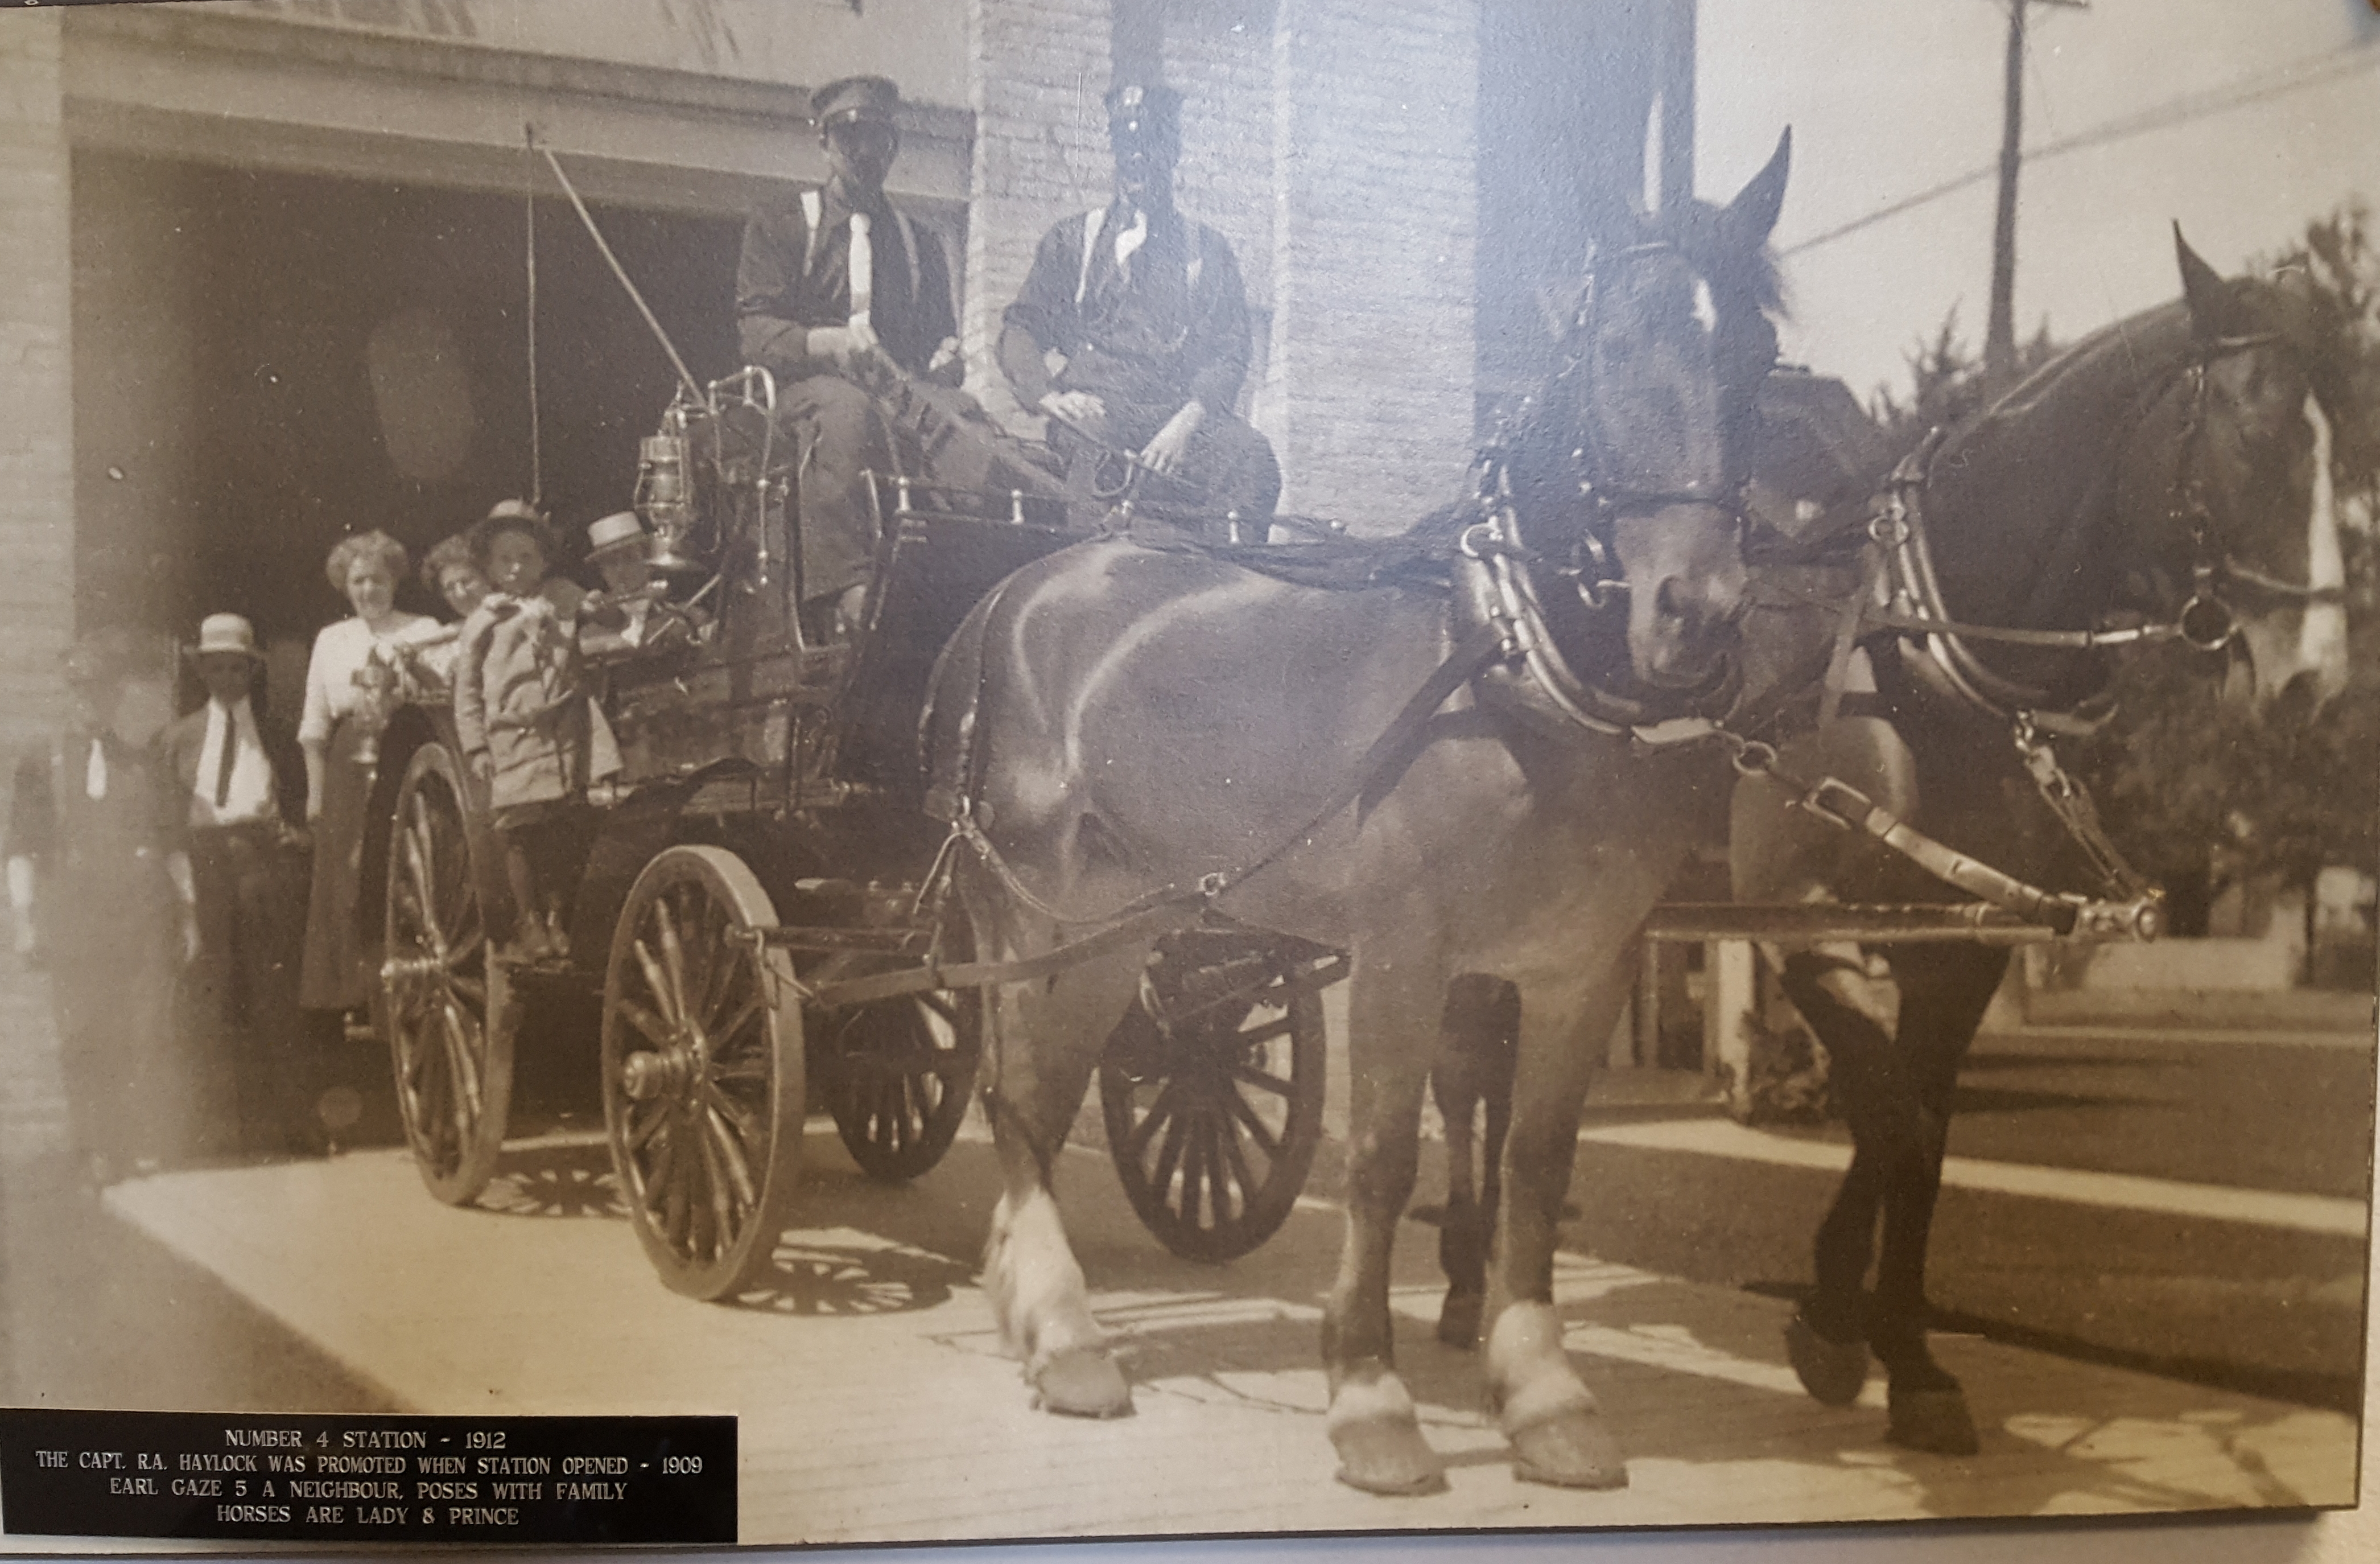 Crew pose with horses and apparatus in front of station with neighours.